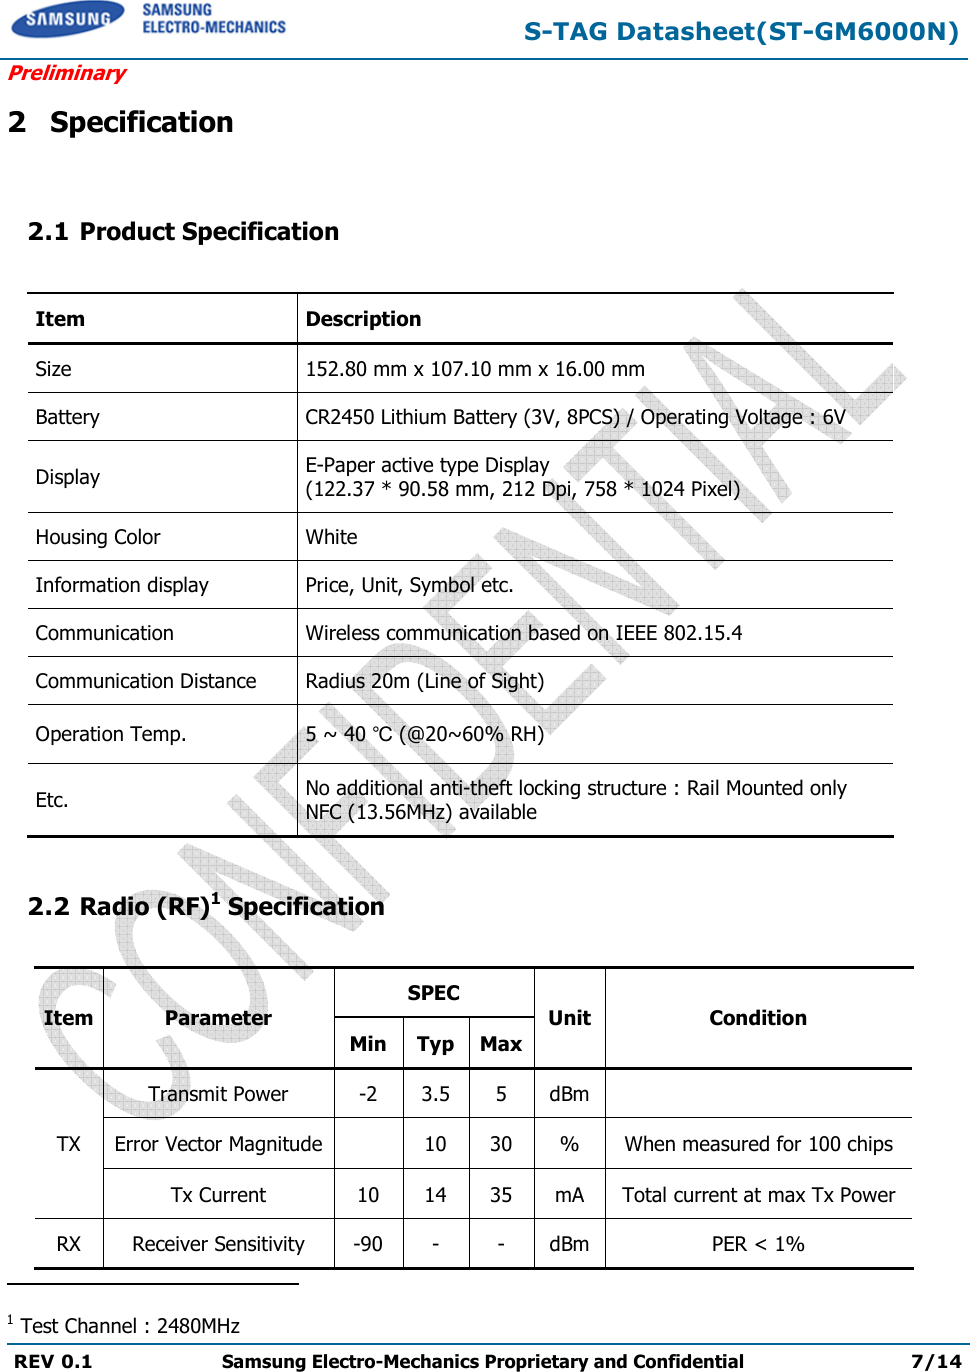  S-TAG Datasheet(ST-GM6000N) Preliminary REV 0.1  Samsung Electro-Mechanics Proprietary and Confidential 7/14   2 Specification  2.1 Product Specification  Item Description Size 152.80 mm x 107.10 mm x 16.00 mm Battery CR2450 Lithium Battery (3V, 8PCS) / Operating Voltage : 6V Display E-Paper active type Display (122.37 * 90.58 mm, 212 Dpi, 758 * 1024 Pixel) Housing Color White Information display Price, Unit, Symbol etc. Communication Wireless communication based on IEEE 802.15.4 Communication Distance Radius 20m (Line of Sight) Operation Temp.  5 ~ 40 ℃ (@20~60% RH) Etc. No additional anti-theft locking structure : Rail Mounted only NFC (13.56MHz) available  2.2 Radio (RF)1 Specification  Item Parameter SPEC Unit Condition Min Typ Max TX Transmit Power -2 3.5 5 dBm  Error Vector Magnitude  10 30 % When measured for 100 chips Tx Current 10 14 35 mA Total current at max Tx Power RX Receiver Sensitivity -90 - - dBm PER &lt; 1%                                                 1 Test Channel : 2480MHz 